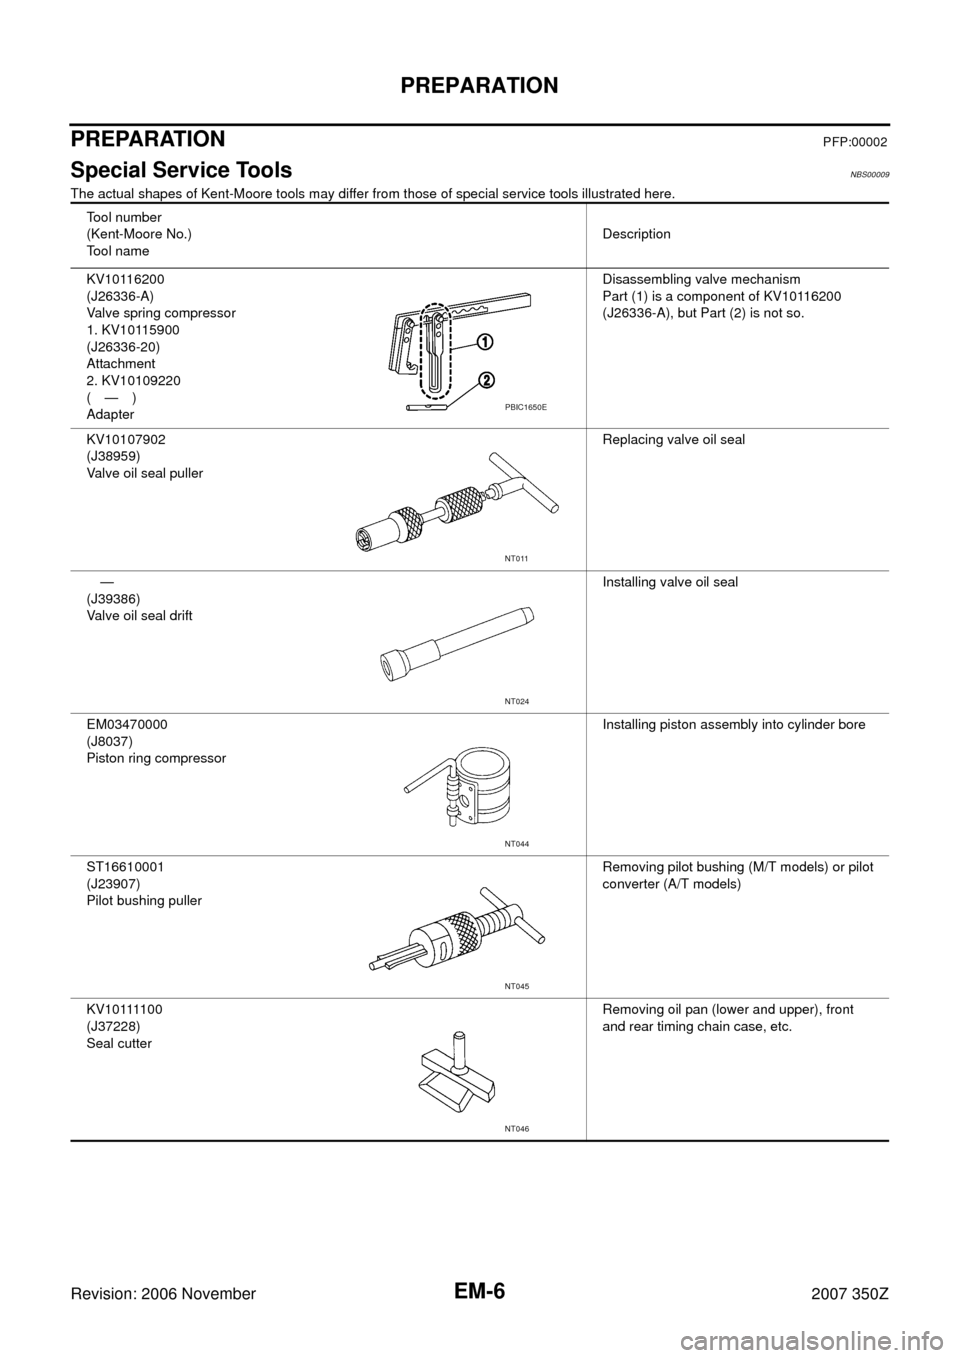 NISSAN 350Z 2007 Z33 Engine Mechanical Workshop Manual EM-6
PREPARATION
Revision: 2006 November2007 350Z
PREPARATIONPFP:00002
Special Service ToolsNBS00009
The actual shapes of Kent-Moore tools may differ from those of special service tools illustrated he